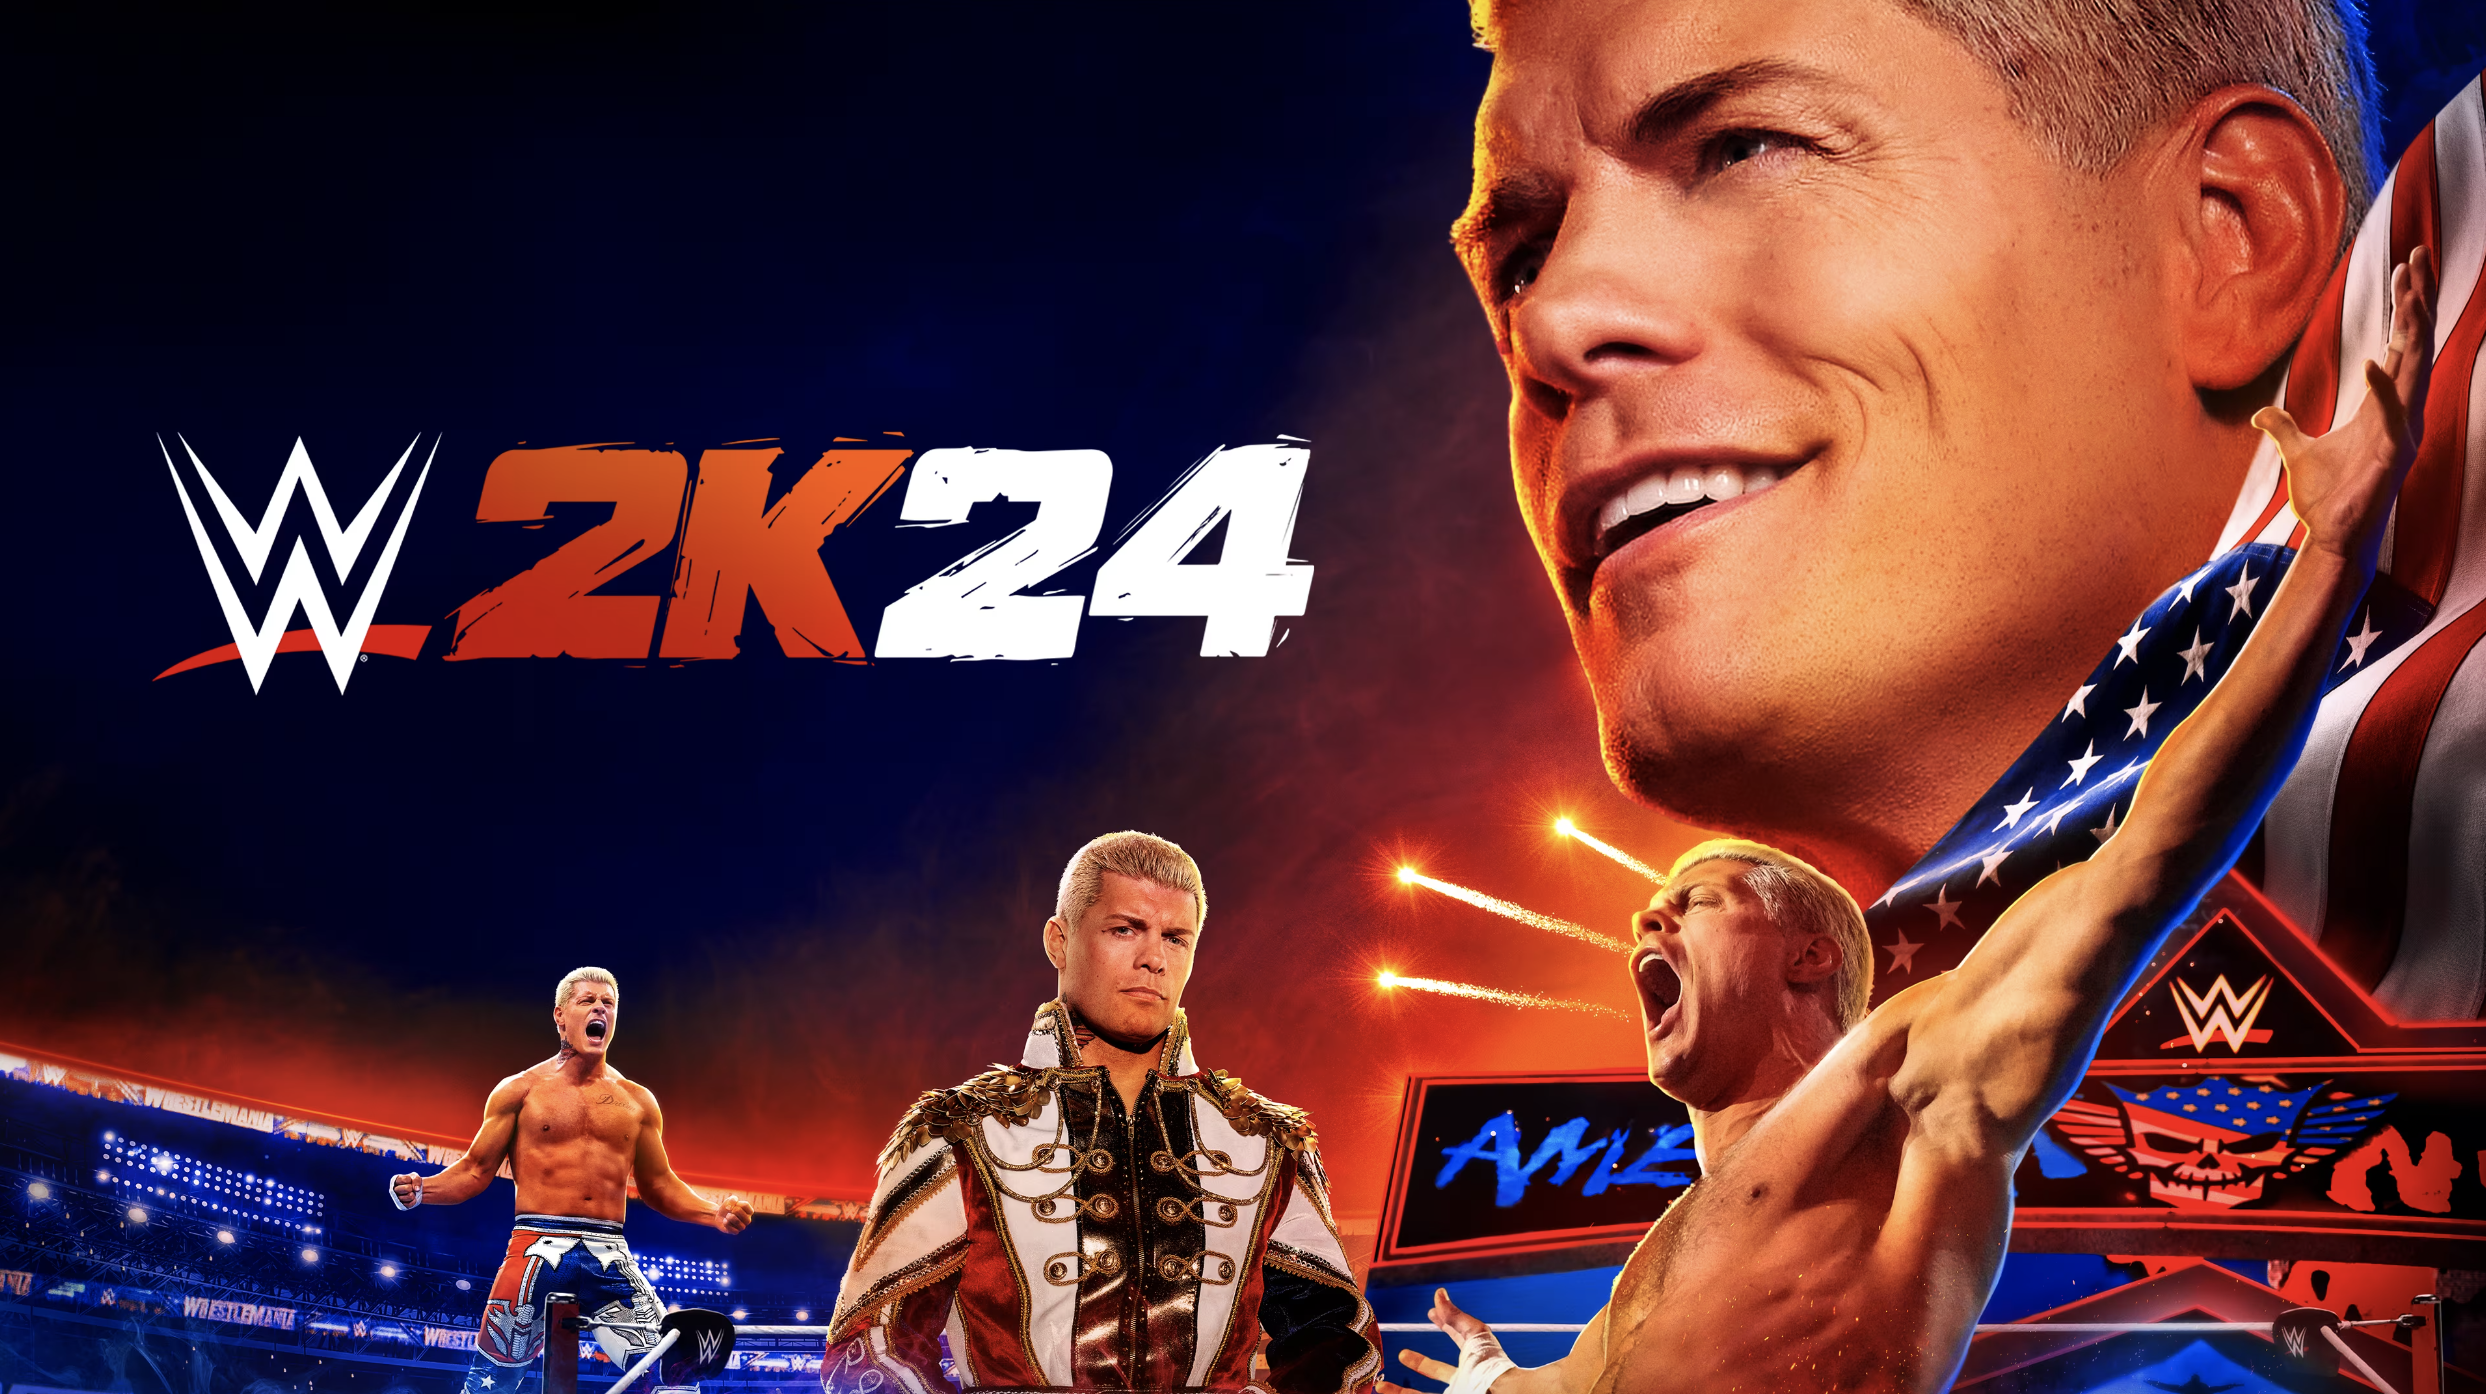 ‘WWE 2K24’ is Another Step Forward for the Franchise – Review